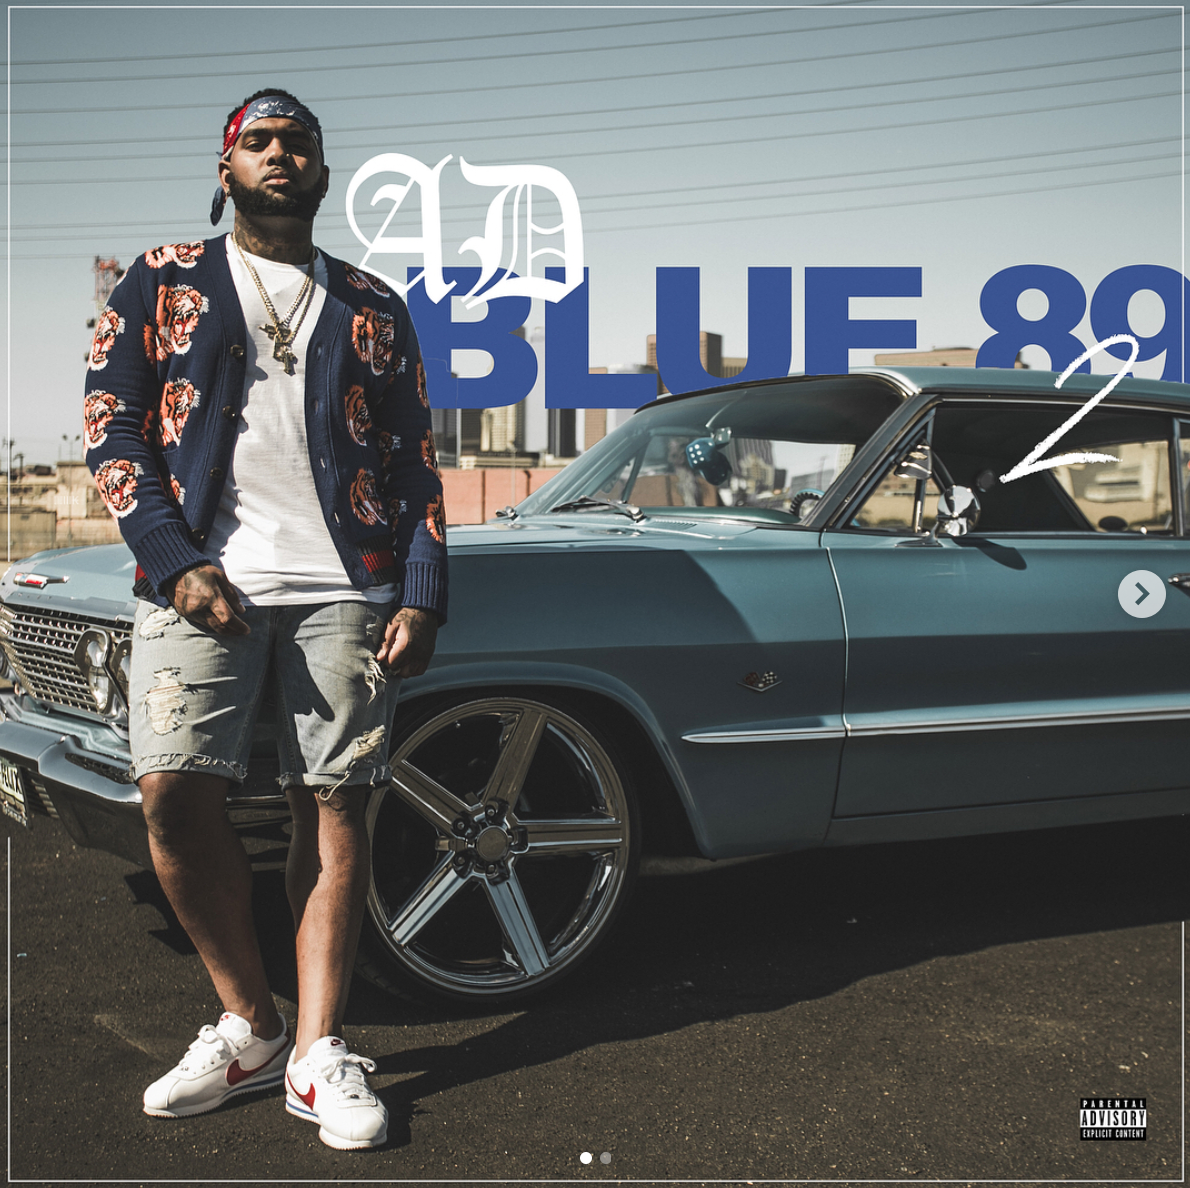 AD Announces Release Date For ‘Blue 89 C.2’ + Shares Track List [PEEP]